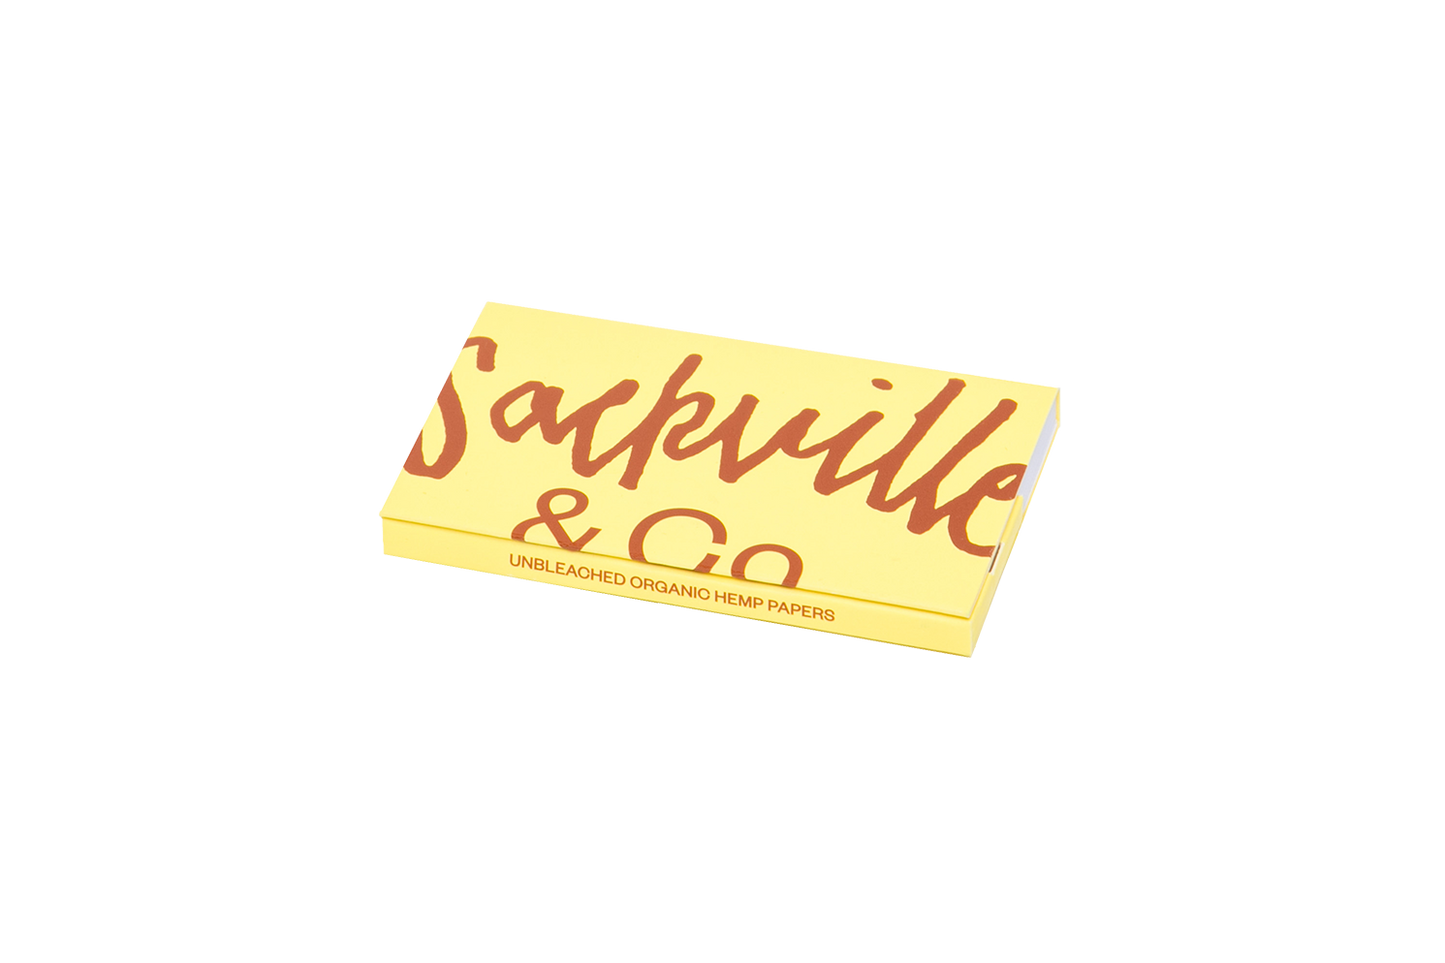 CASE - YELLOW ROLLING PAPERS - Sackville & Co.